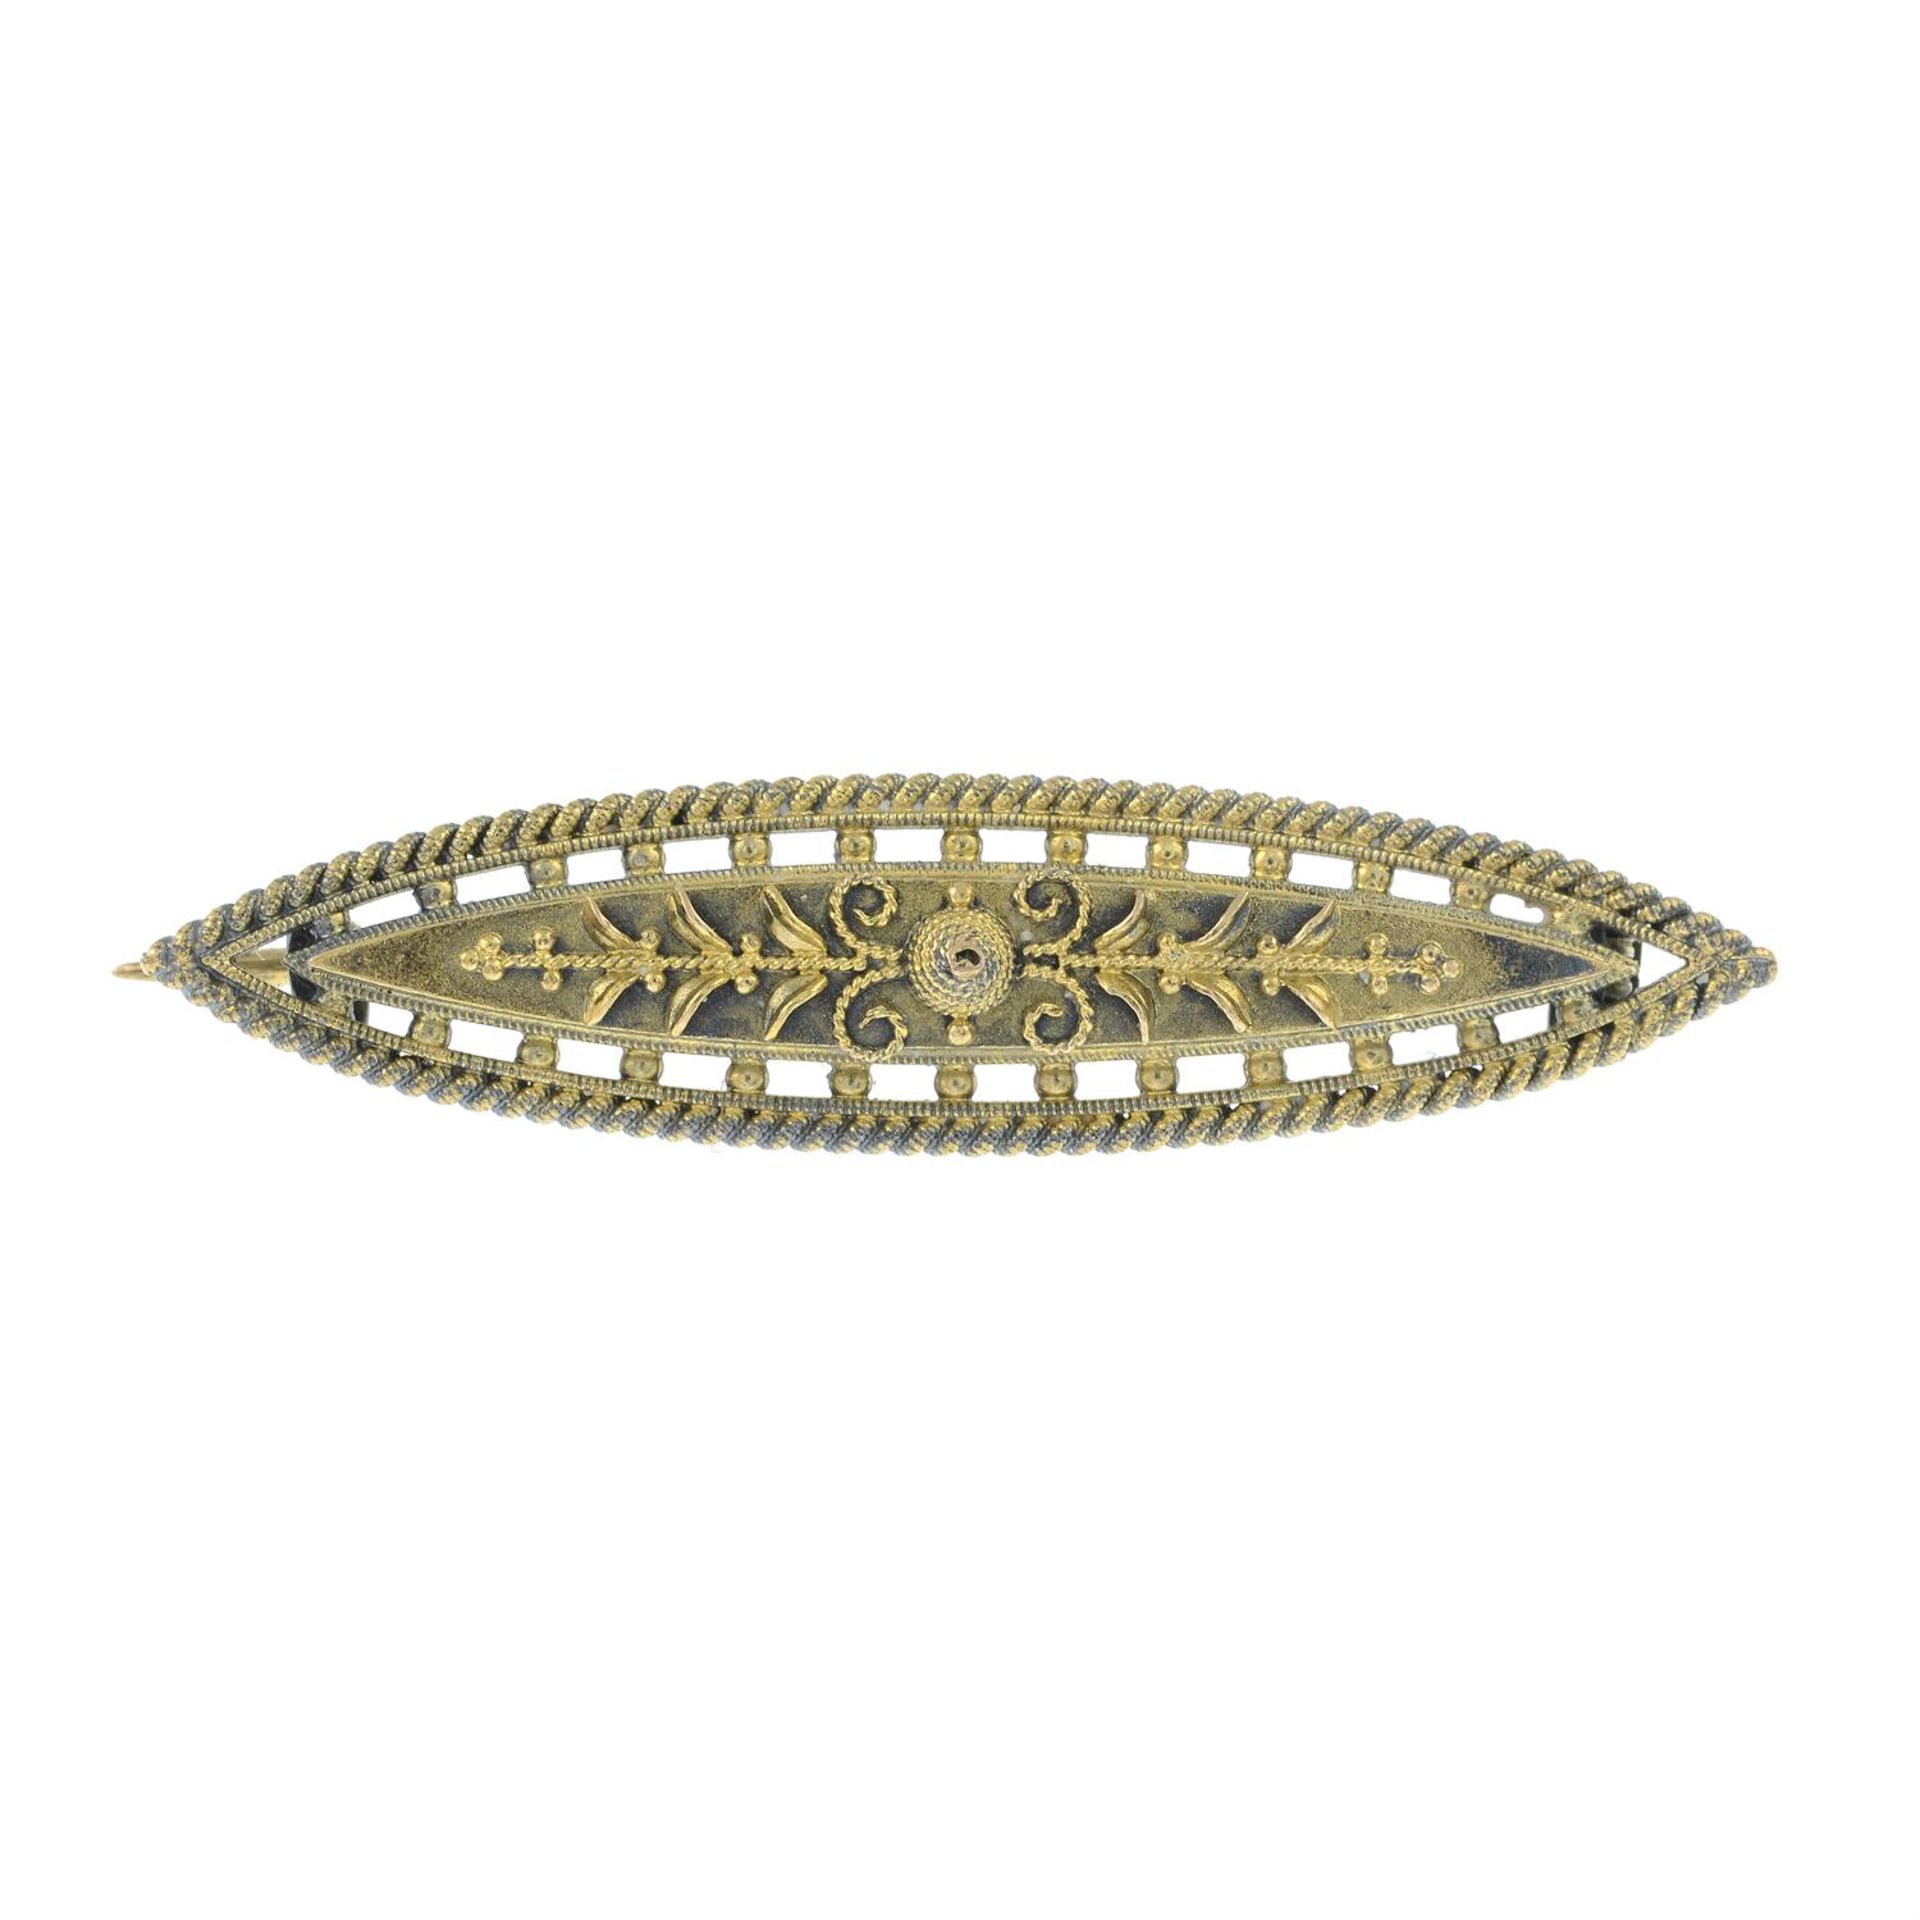 An early 20th century 15ct gold cannetille brooch.